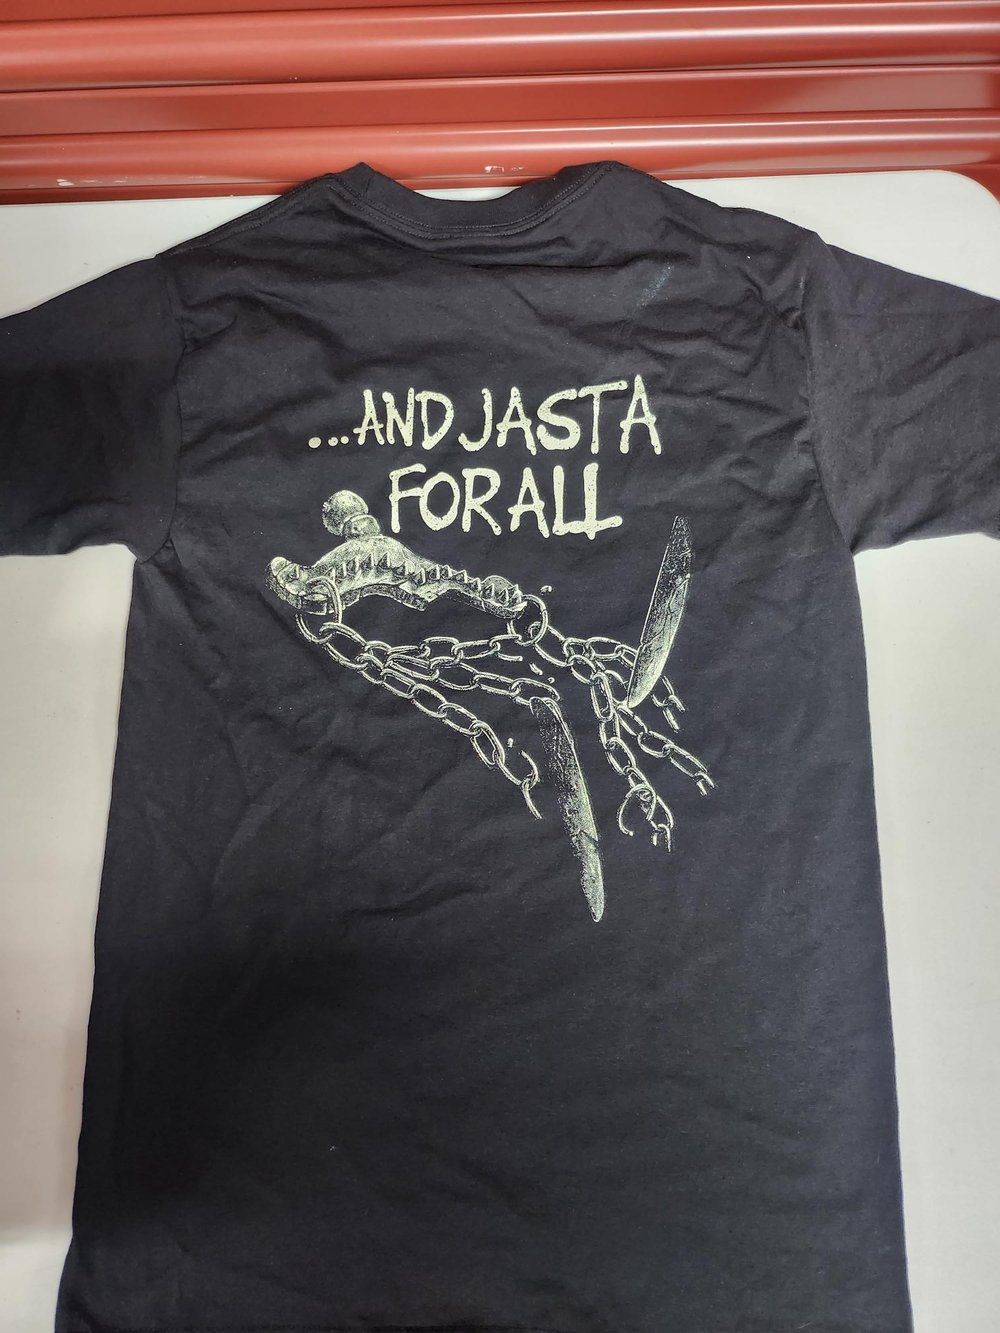 JASTA "And Jasta For All" T-shirt